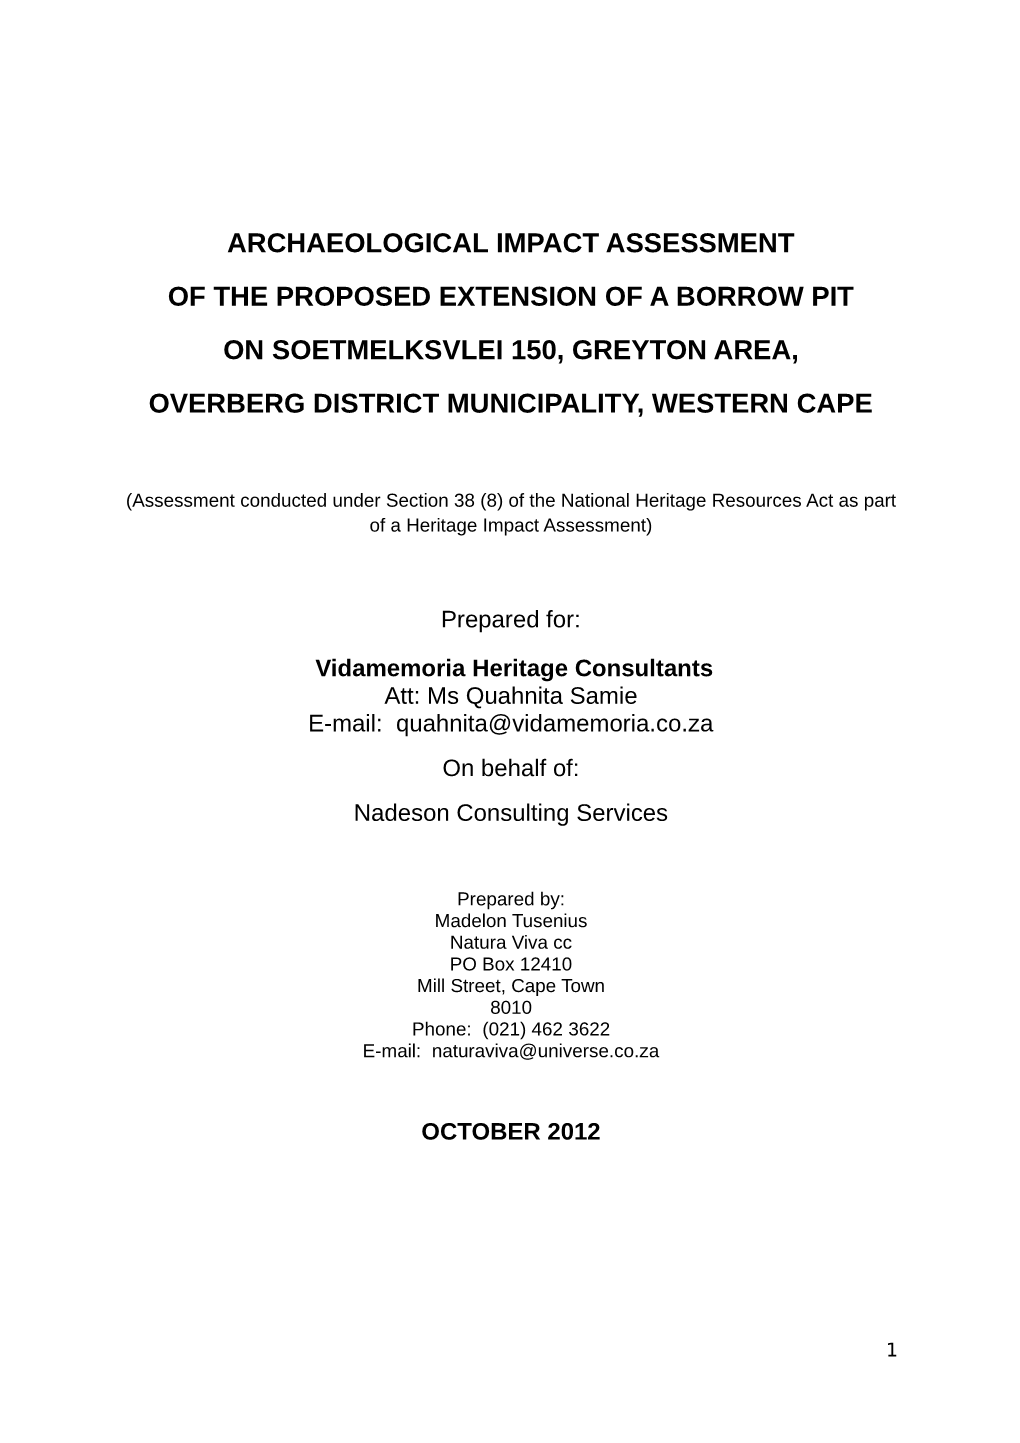 Archaeological Impact Assessment of the Proposed Extension of a Borrow Pit on Soetmelksvlei 150, Greyton Area, Overberg District Municipality, Western Cape